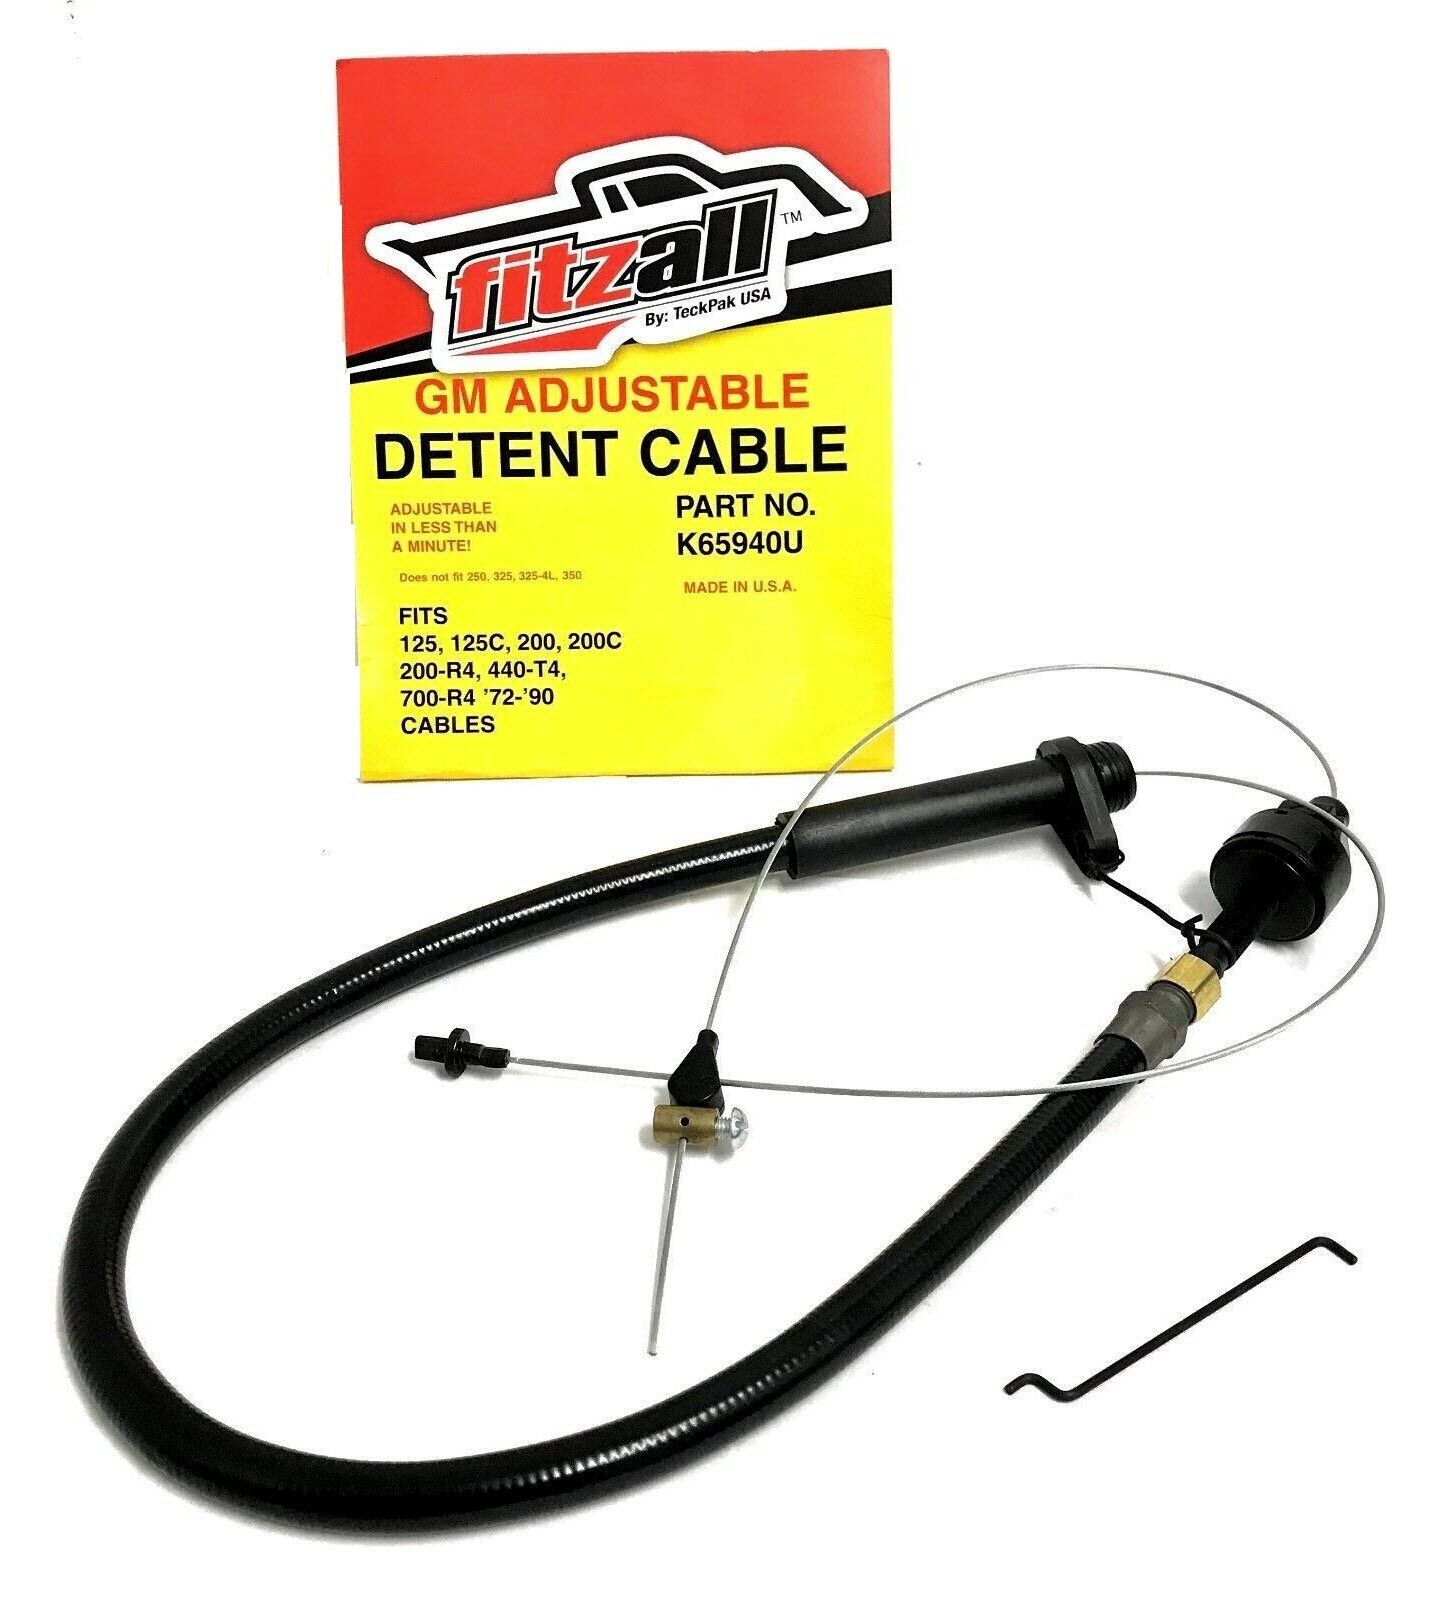 Transmission Kickdown Detent Cable GM 700-R4 TH-200 Braided Adjustable